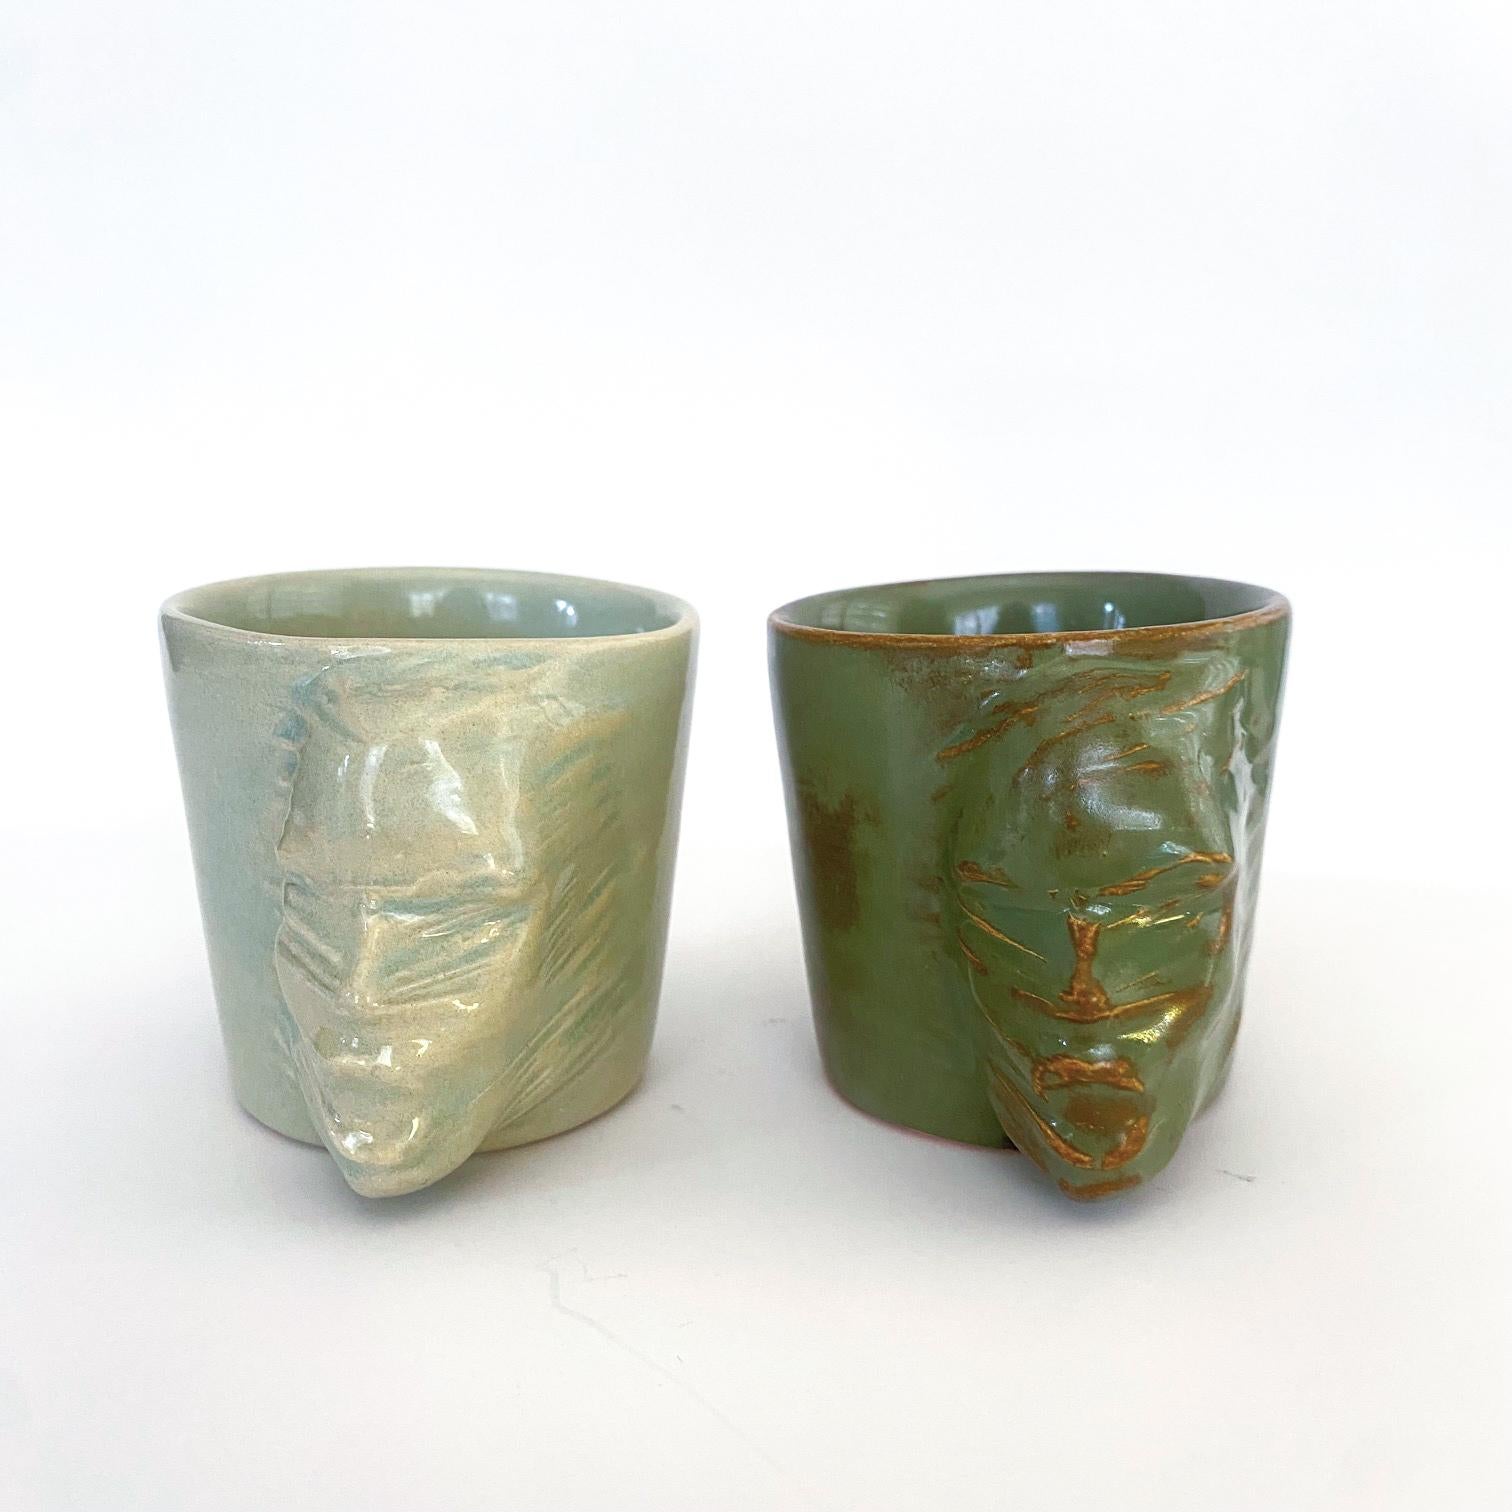 Turkish Sculptural Ceramic Cups Set of 4 by Hulya Sozer, Face Silhouette, Earth Tones For Sale